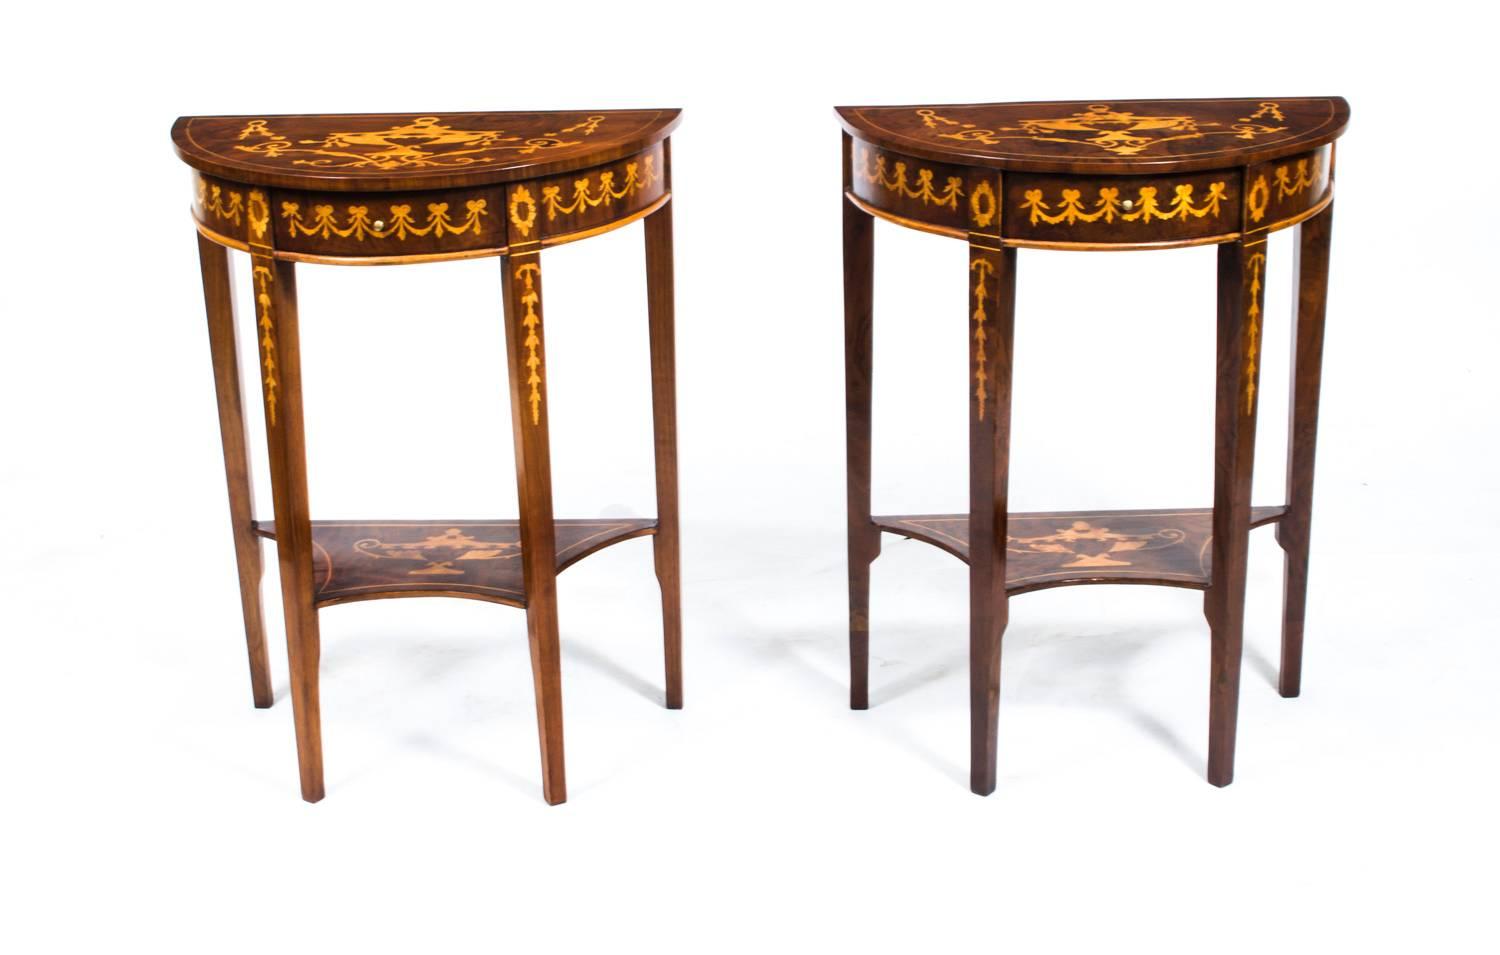 This is a stunning pair of vintage Sheraton style bur walnut half moon console tables of unusually small size, in fine Edwardian Sheraton Revival style and dating from the second half of the 20th century.

They each have a drawer in the frieze,